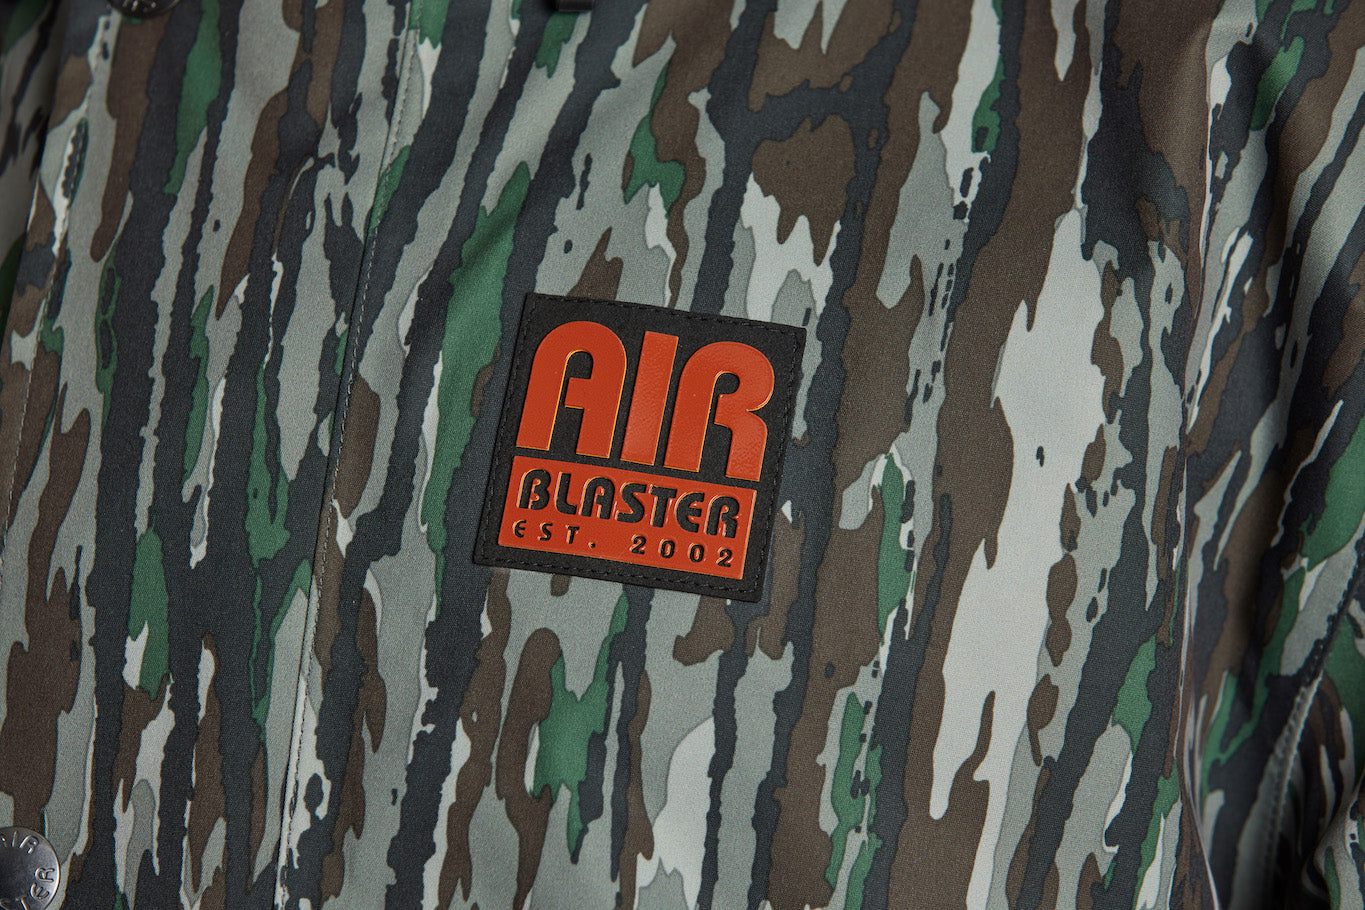 INSULATED MAN'S EASY STYLE BLACK AIR BLASTER